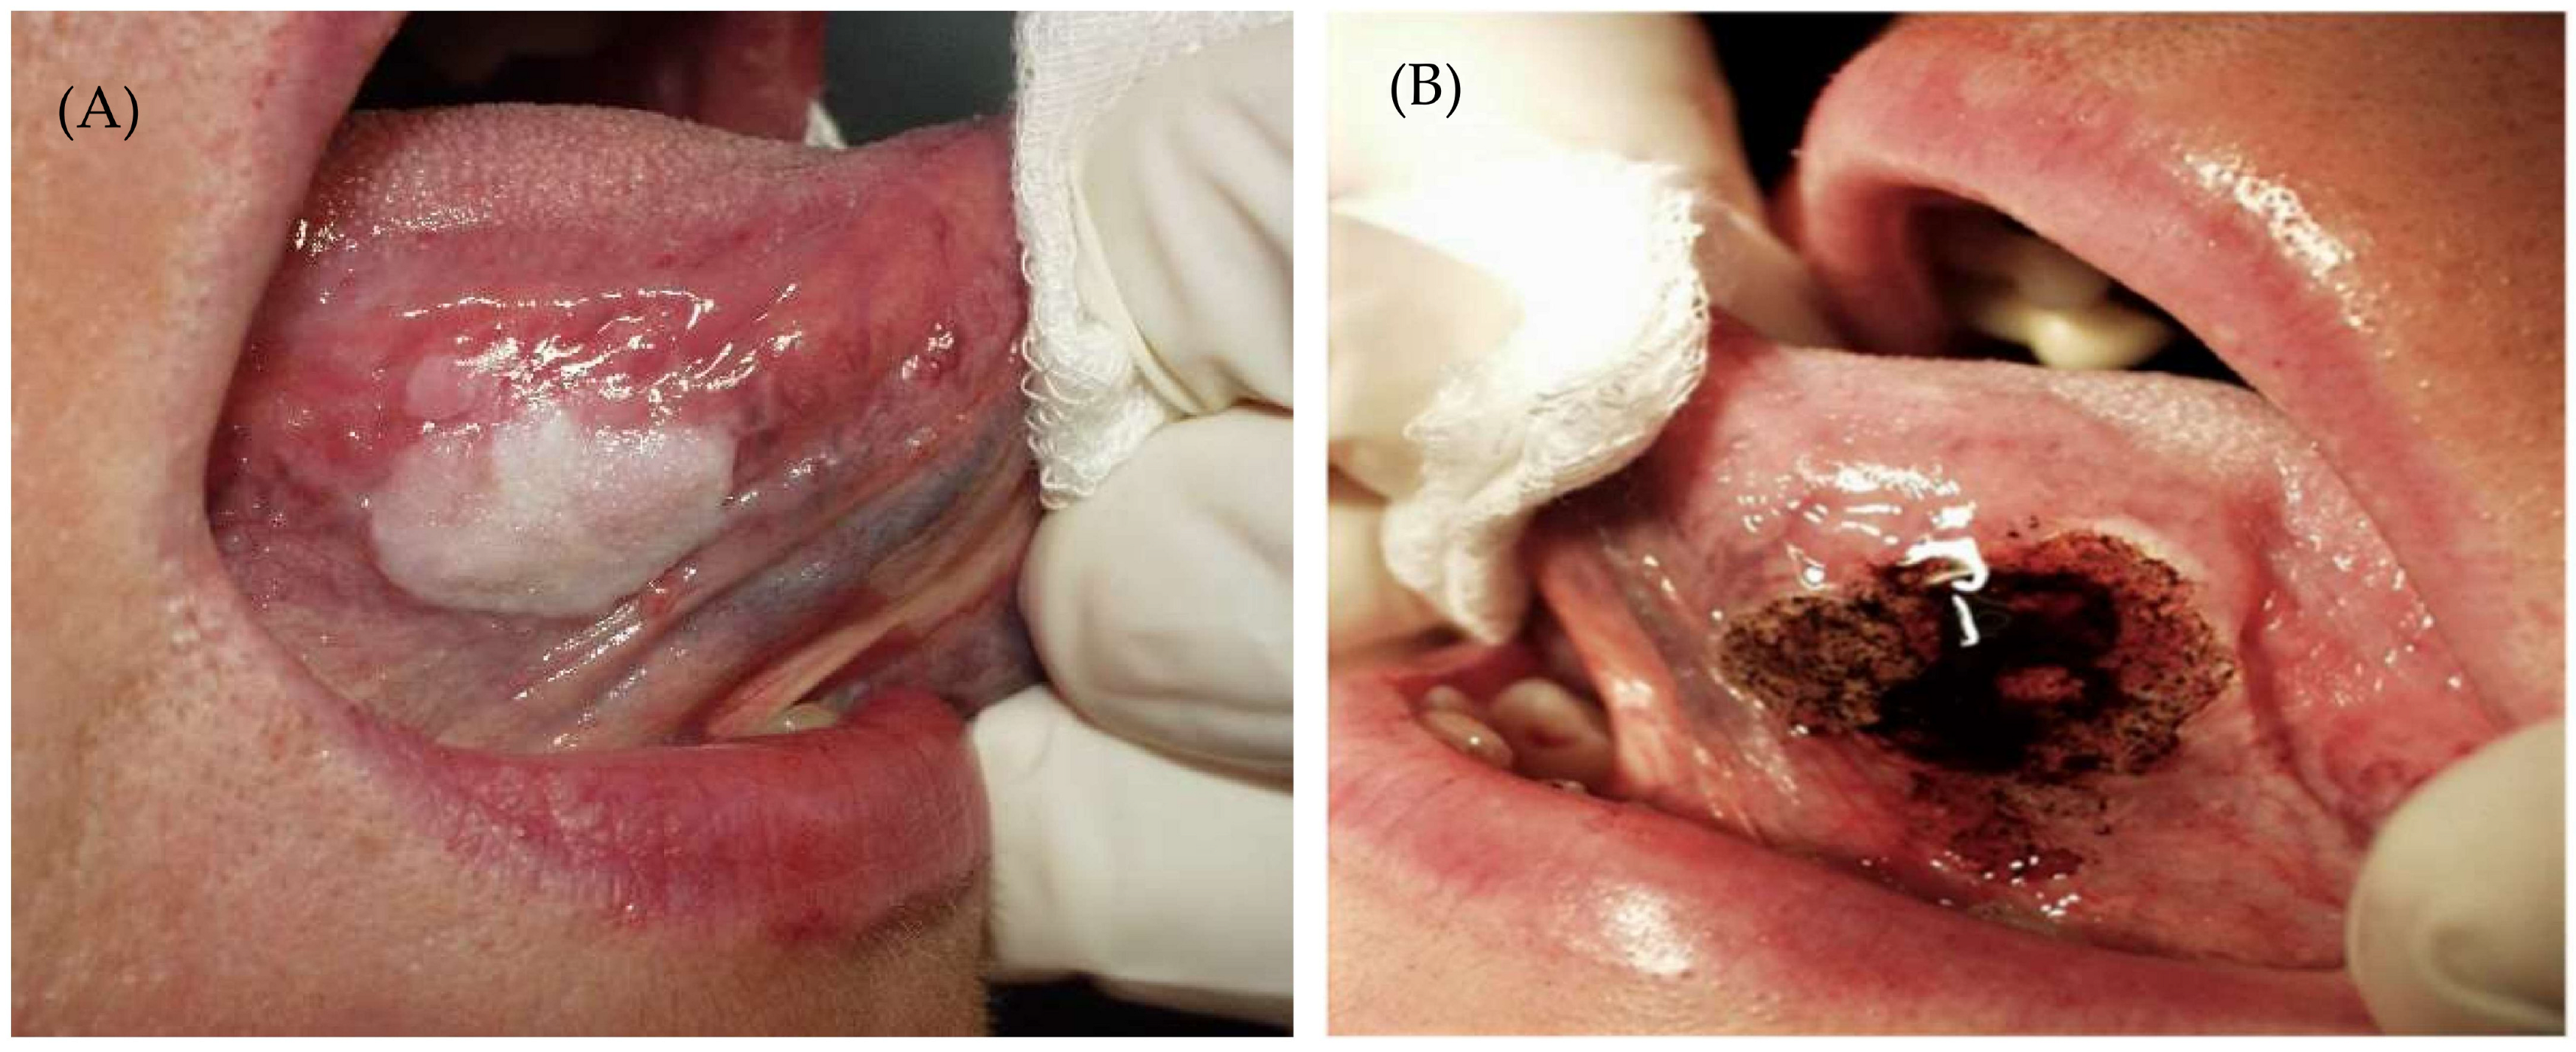 Cancers | Free Full-Text | Recurrence of Oral Leukoplakia after CO2 Laser  Resection: A Prospective Longitudinal Study